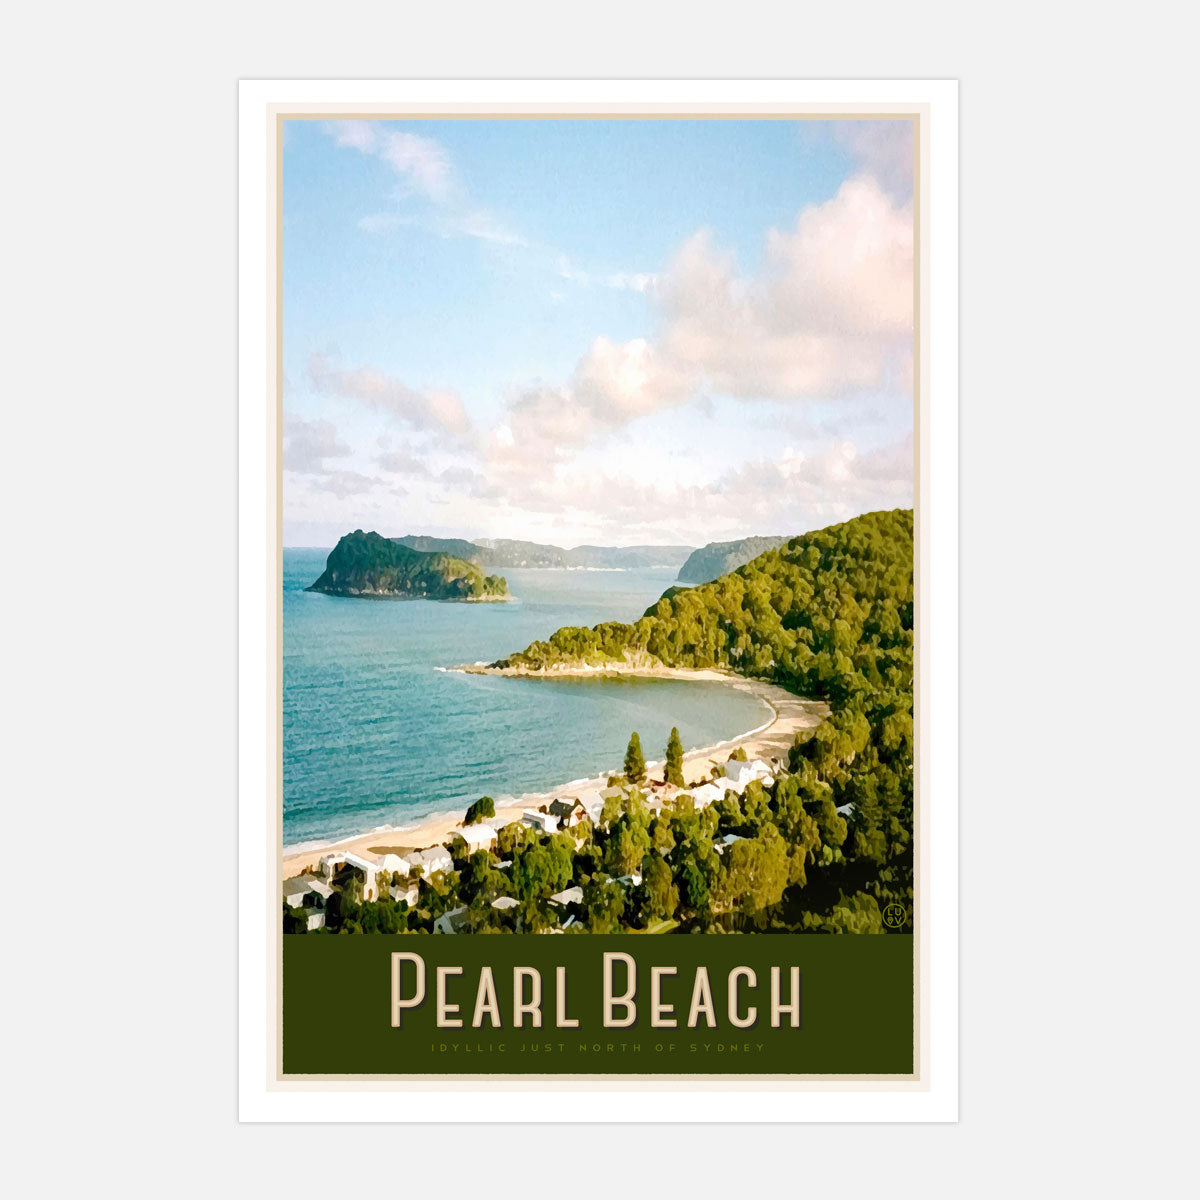 Pearl beach vintage travel poster print by places we luv